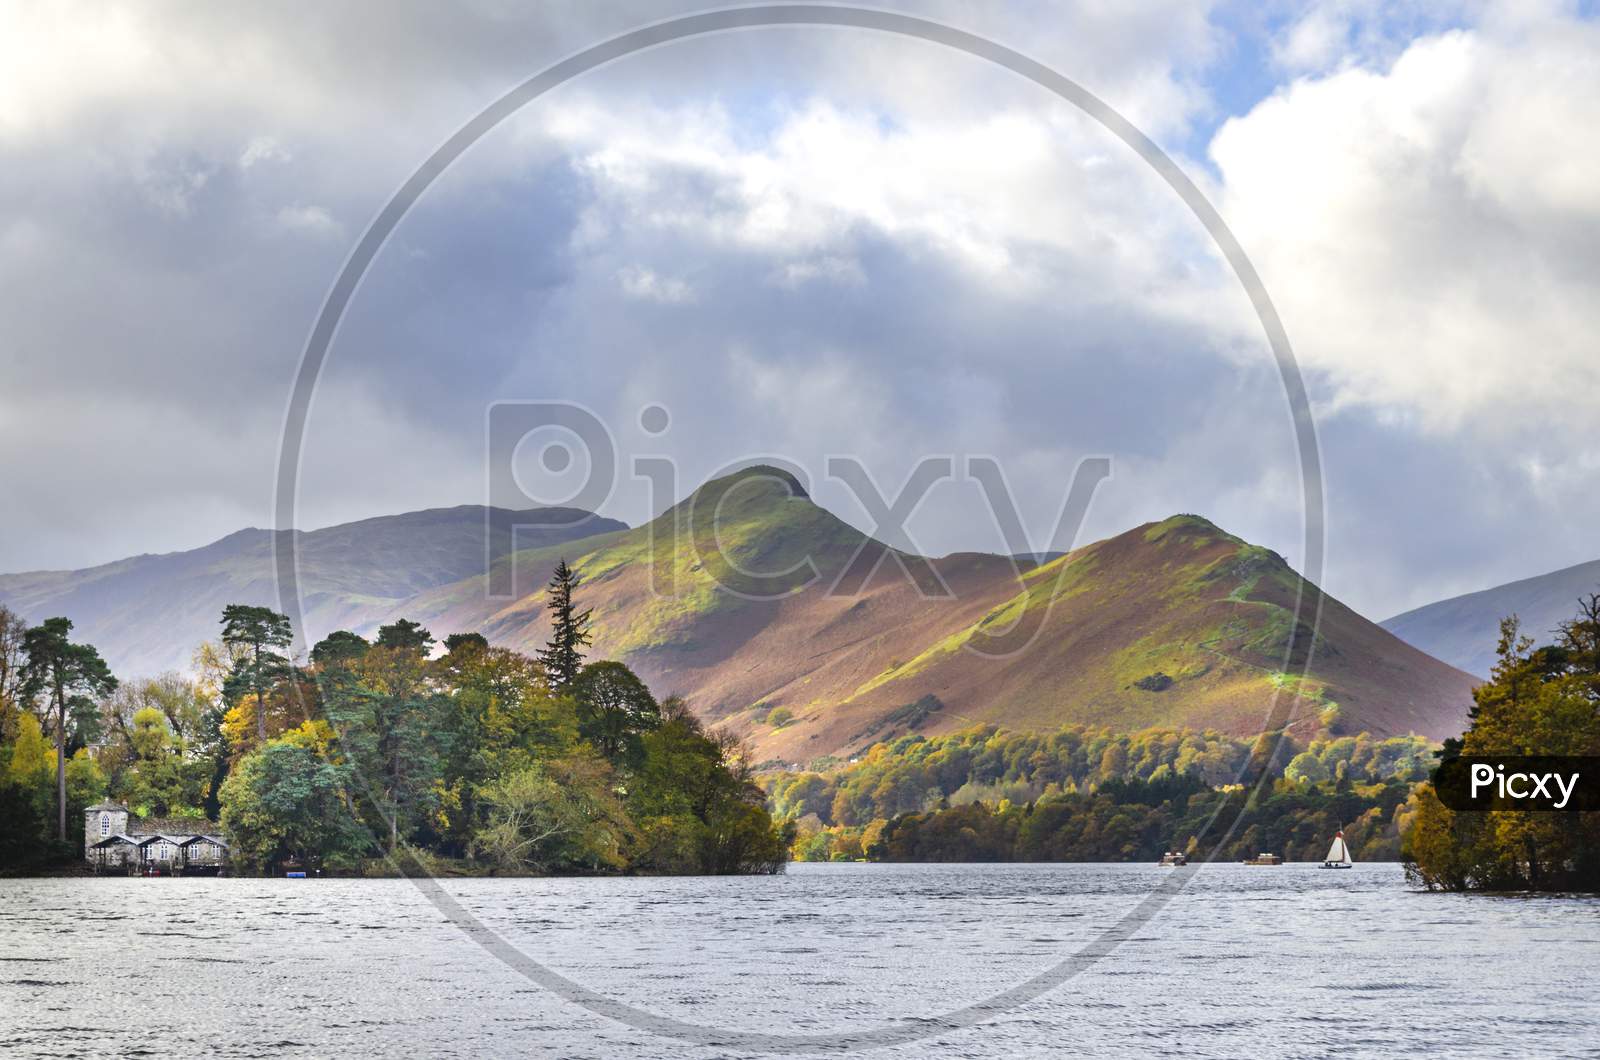 The fell by Derwent water known as cat bells at Keswick.